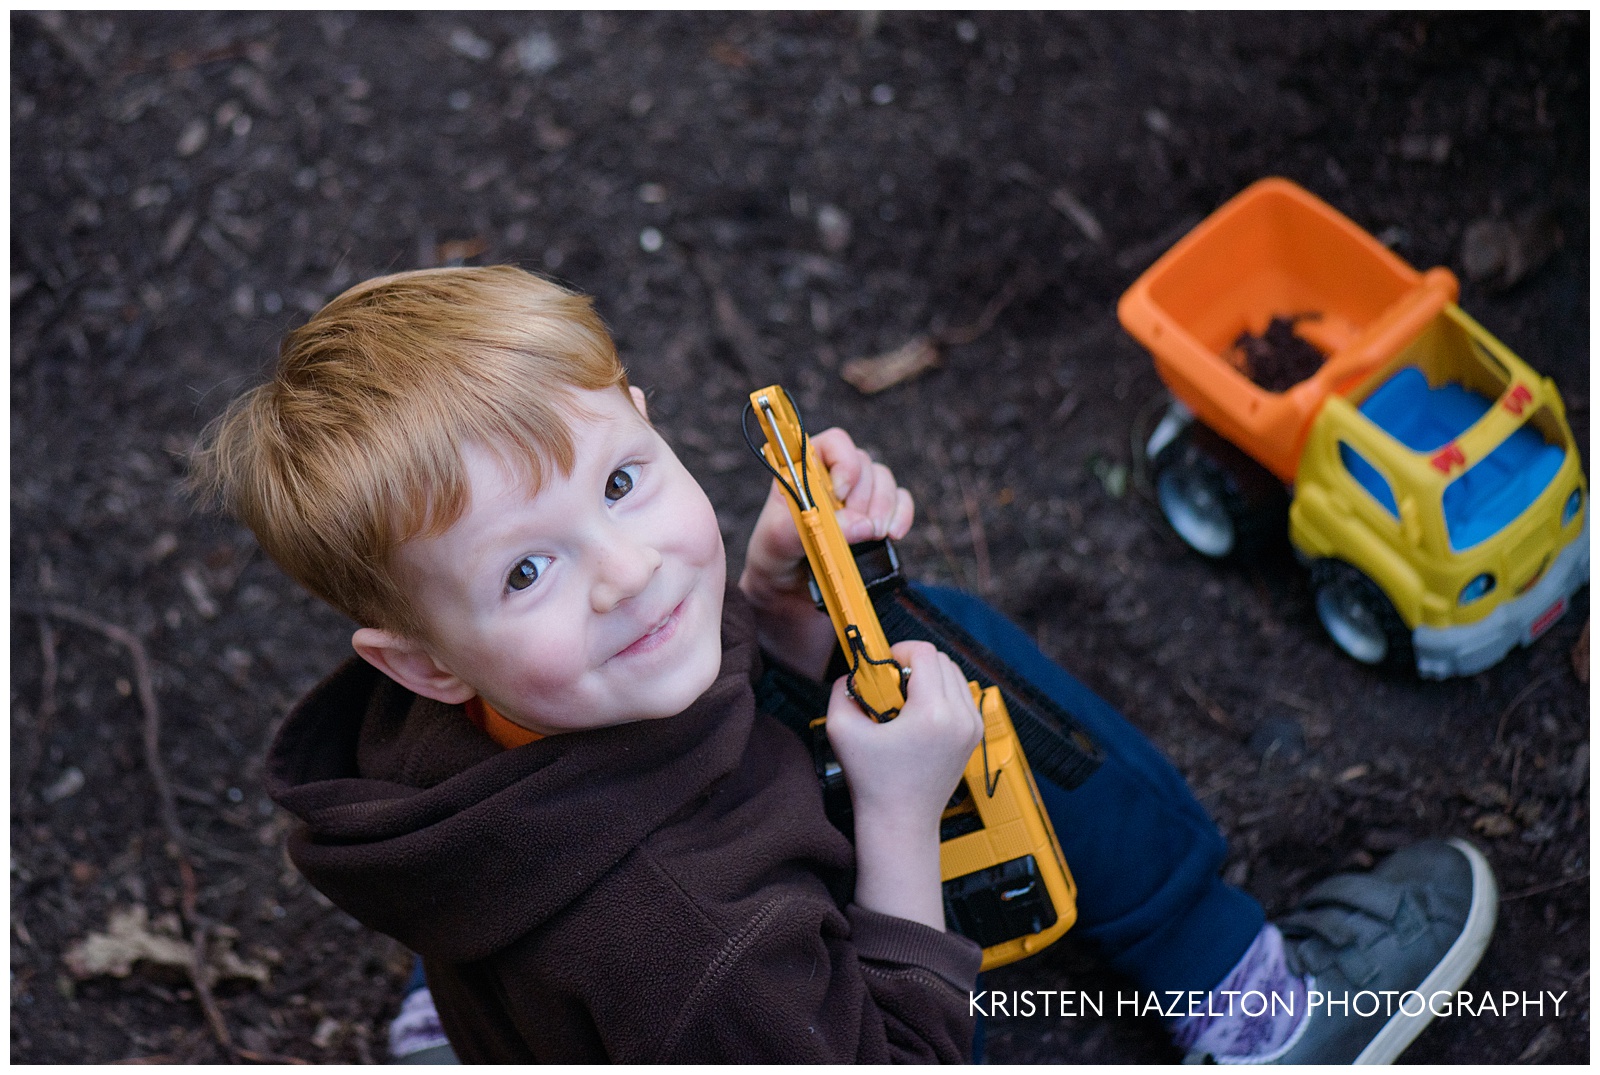 Toddler playing in the dirt with excavator and dump truck toys